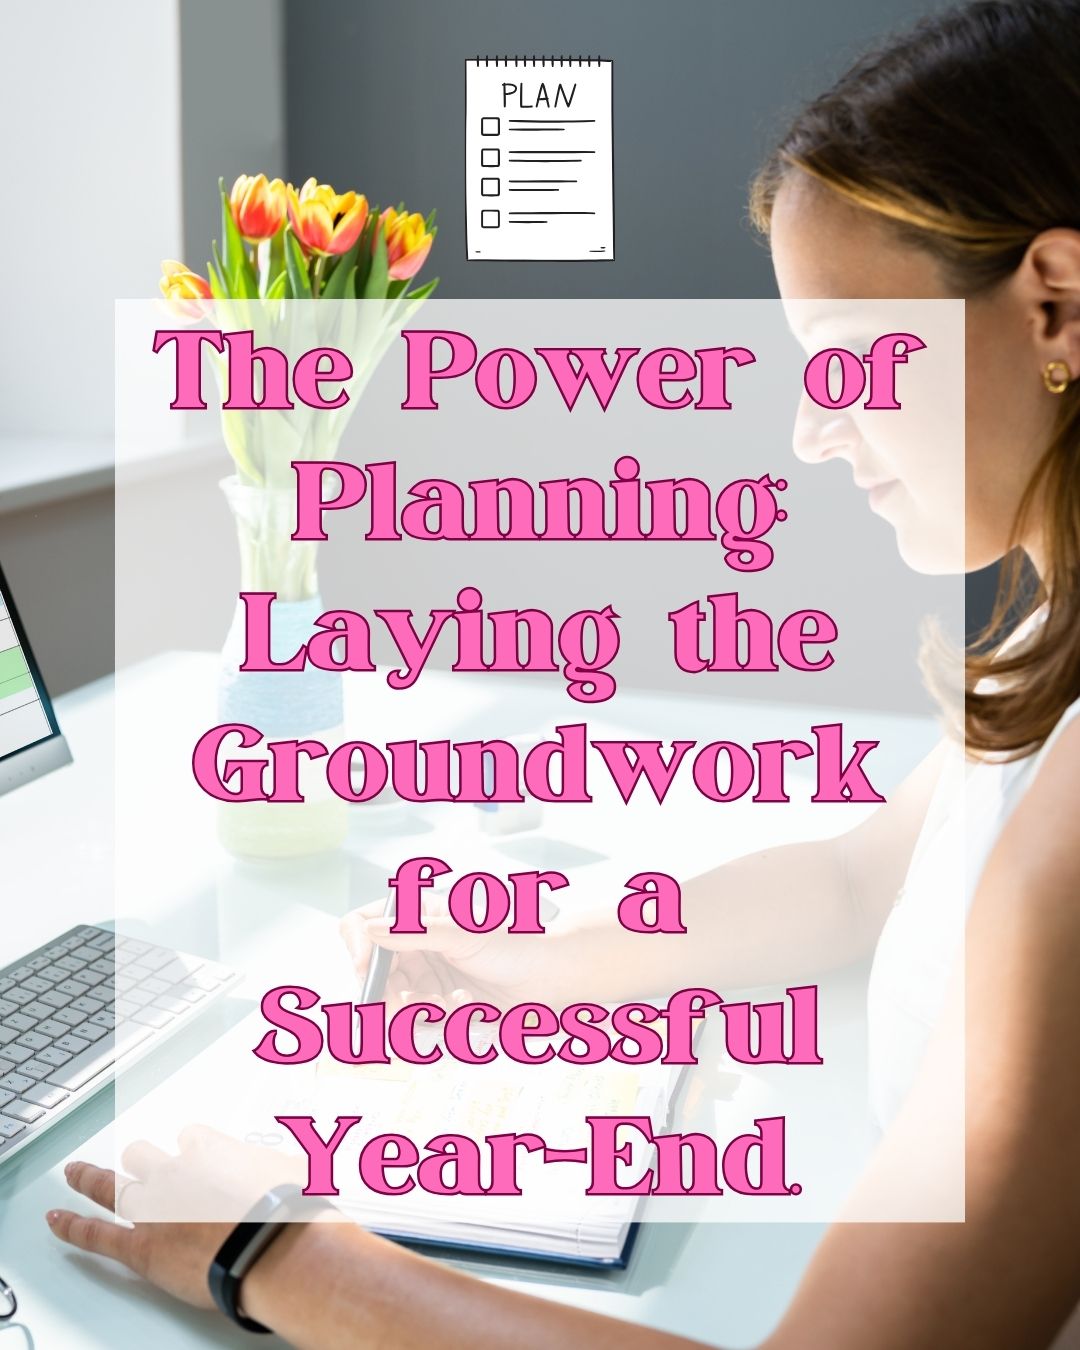 The Power of Planning: Laying the Groundwork for a Successful Year-End